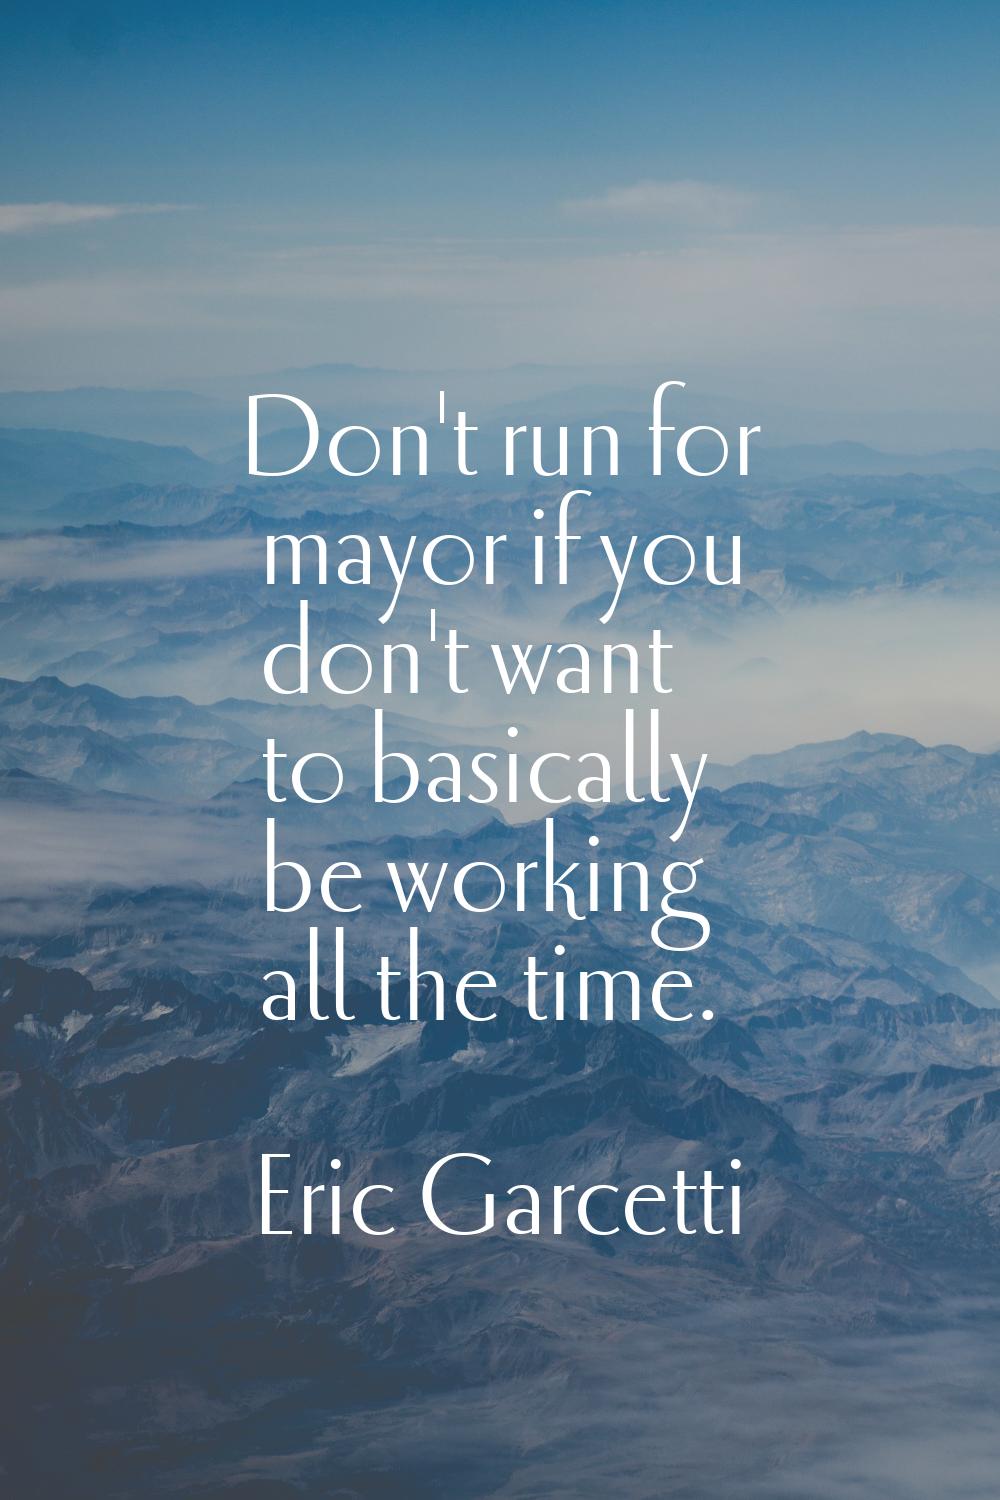 Don't run for mayor if you don't want to basically be working all the time.